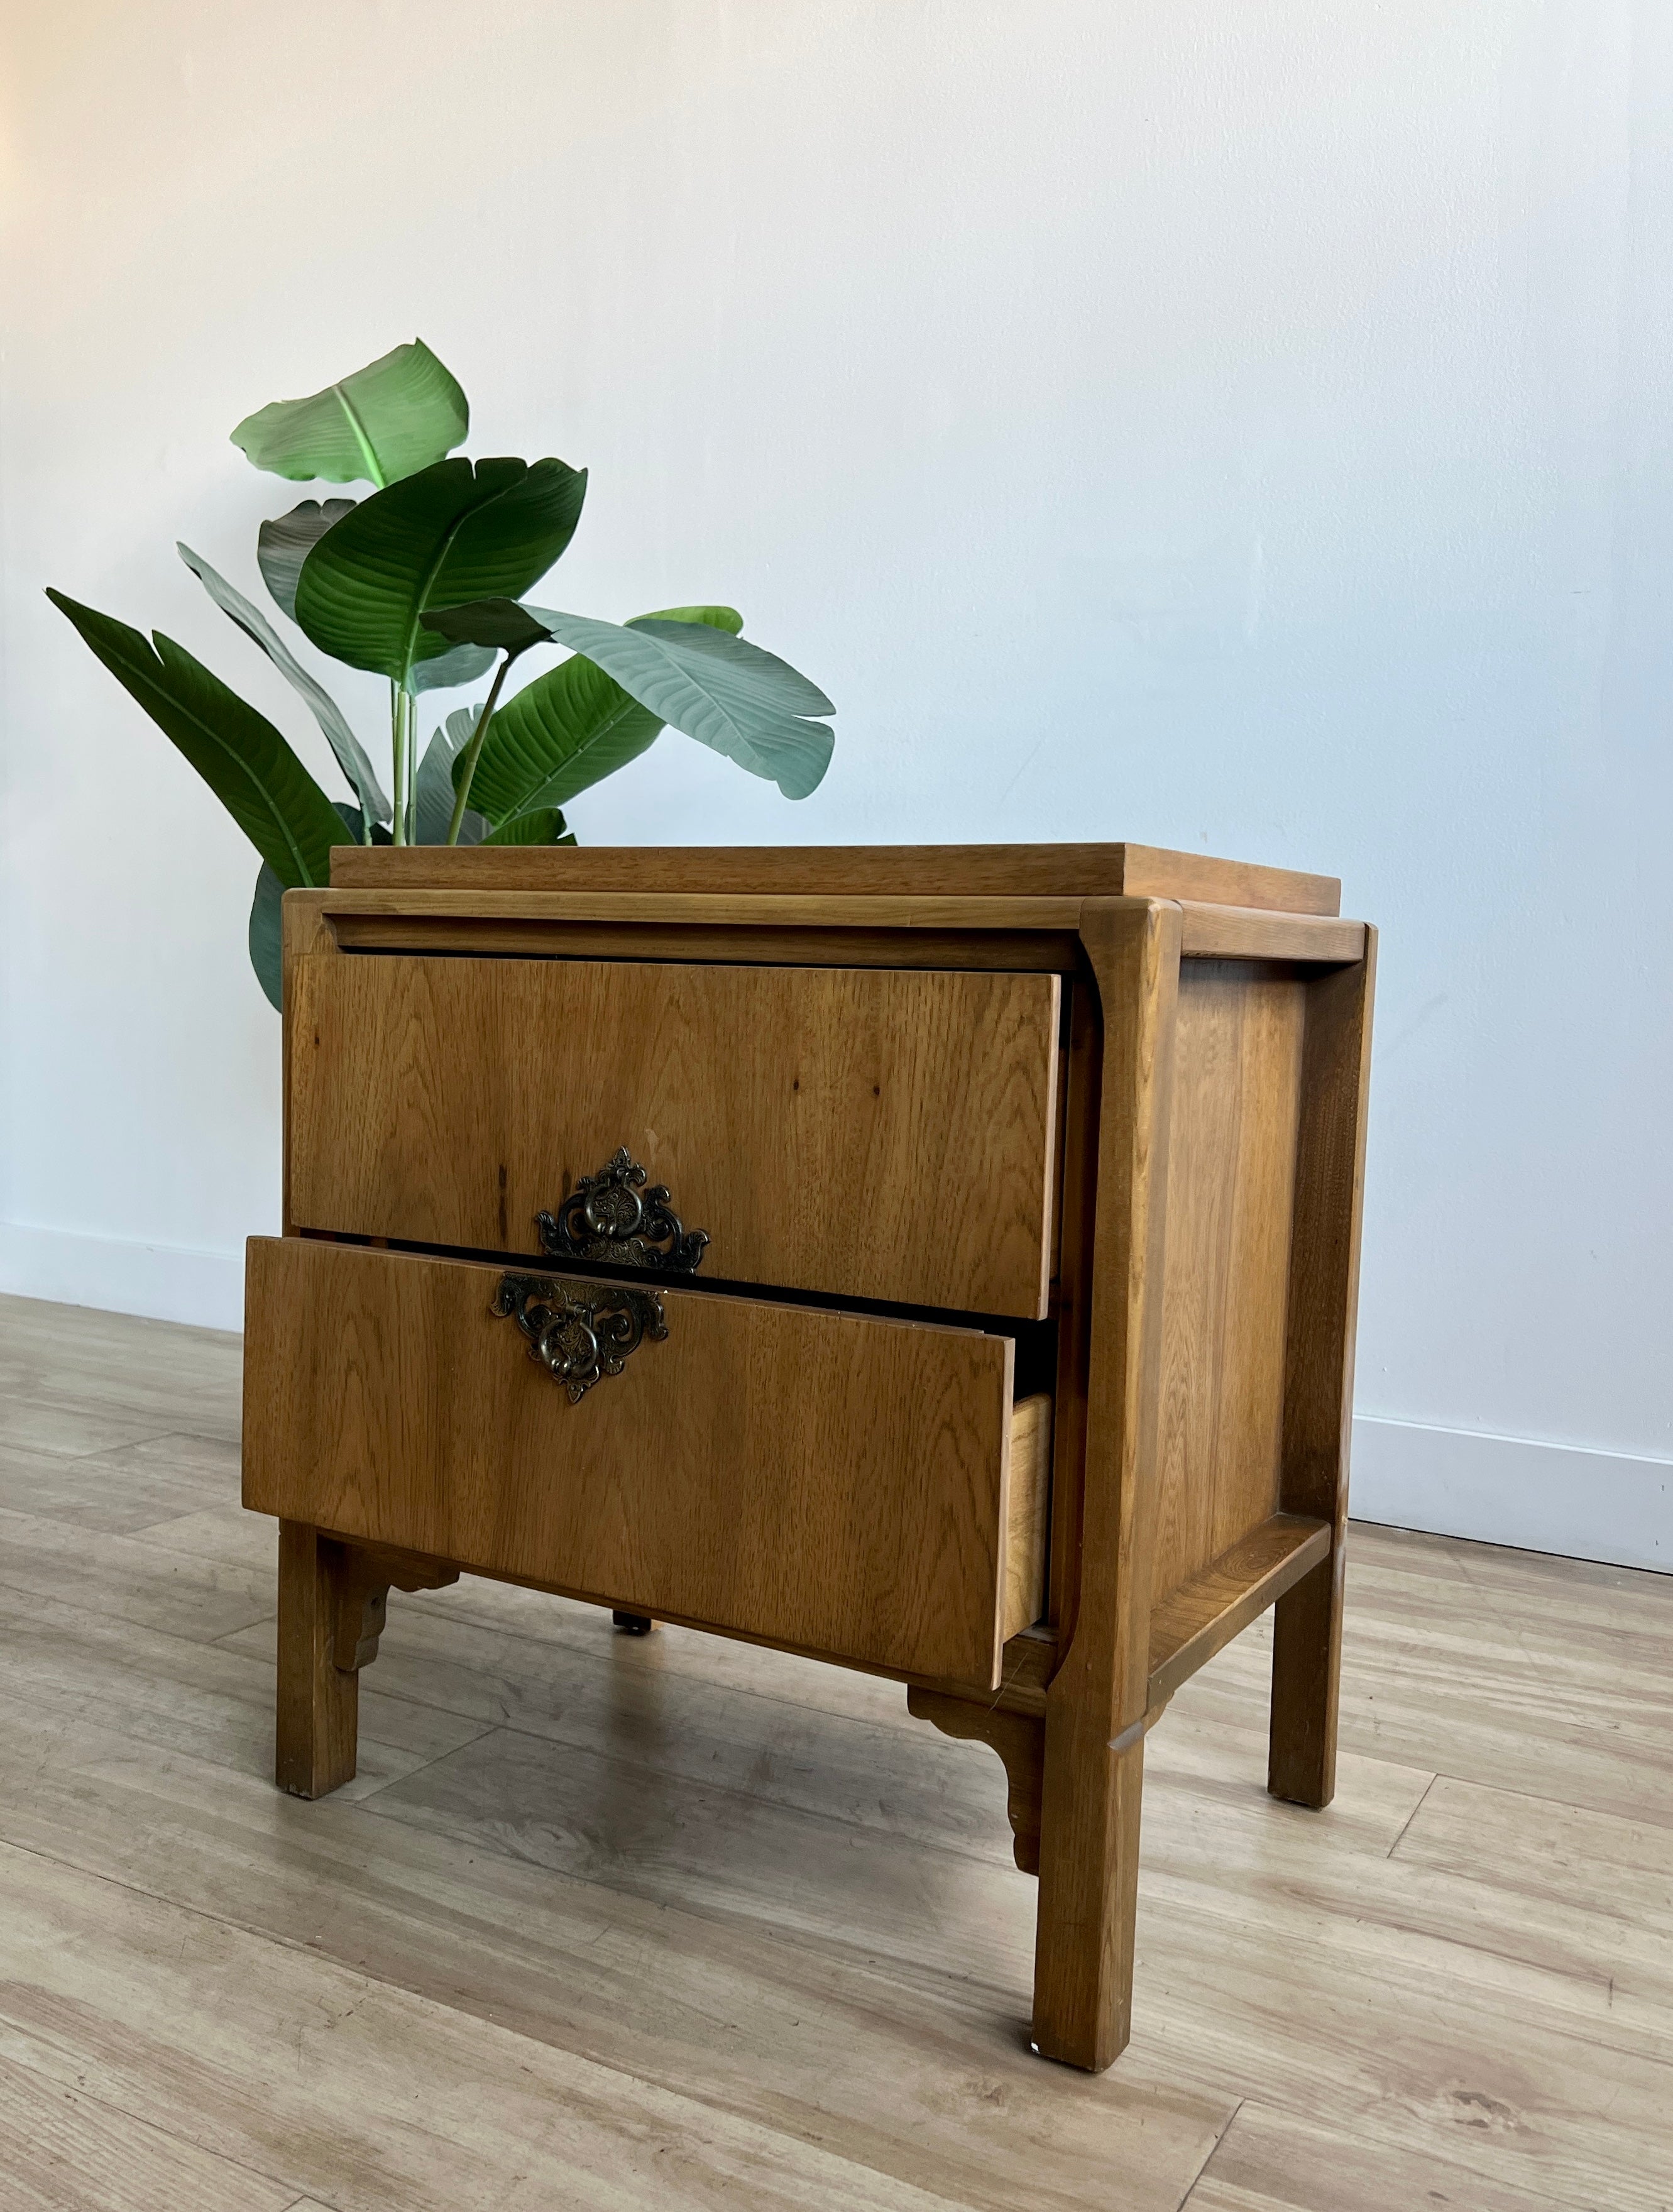 Vintage Moroccan Style Nightstand